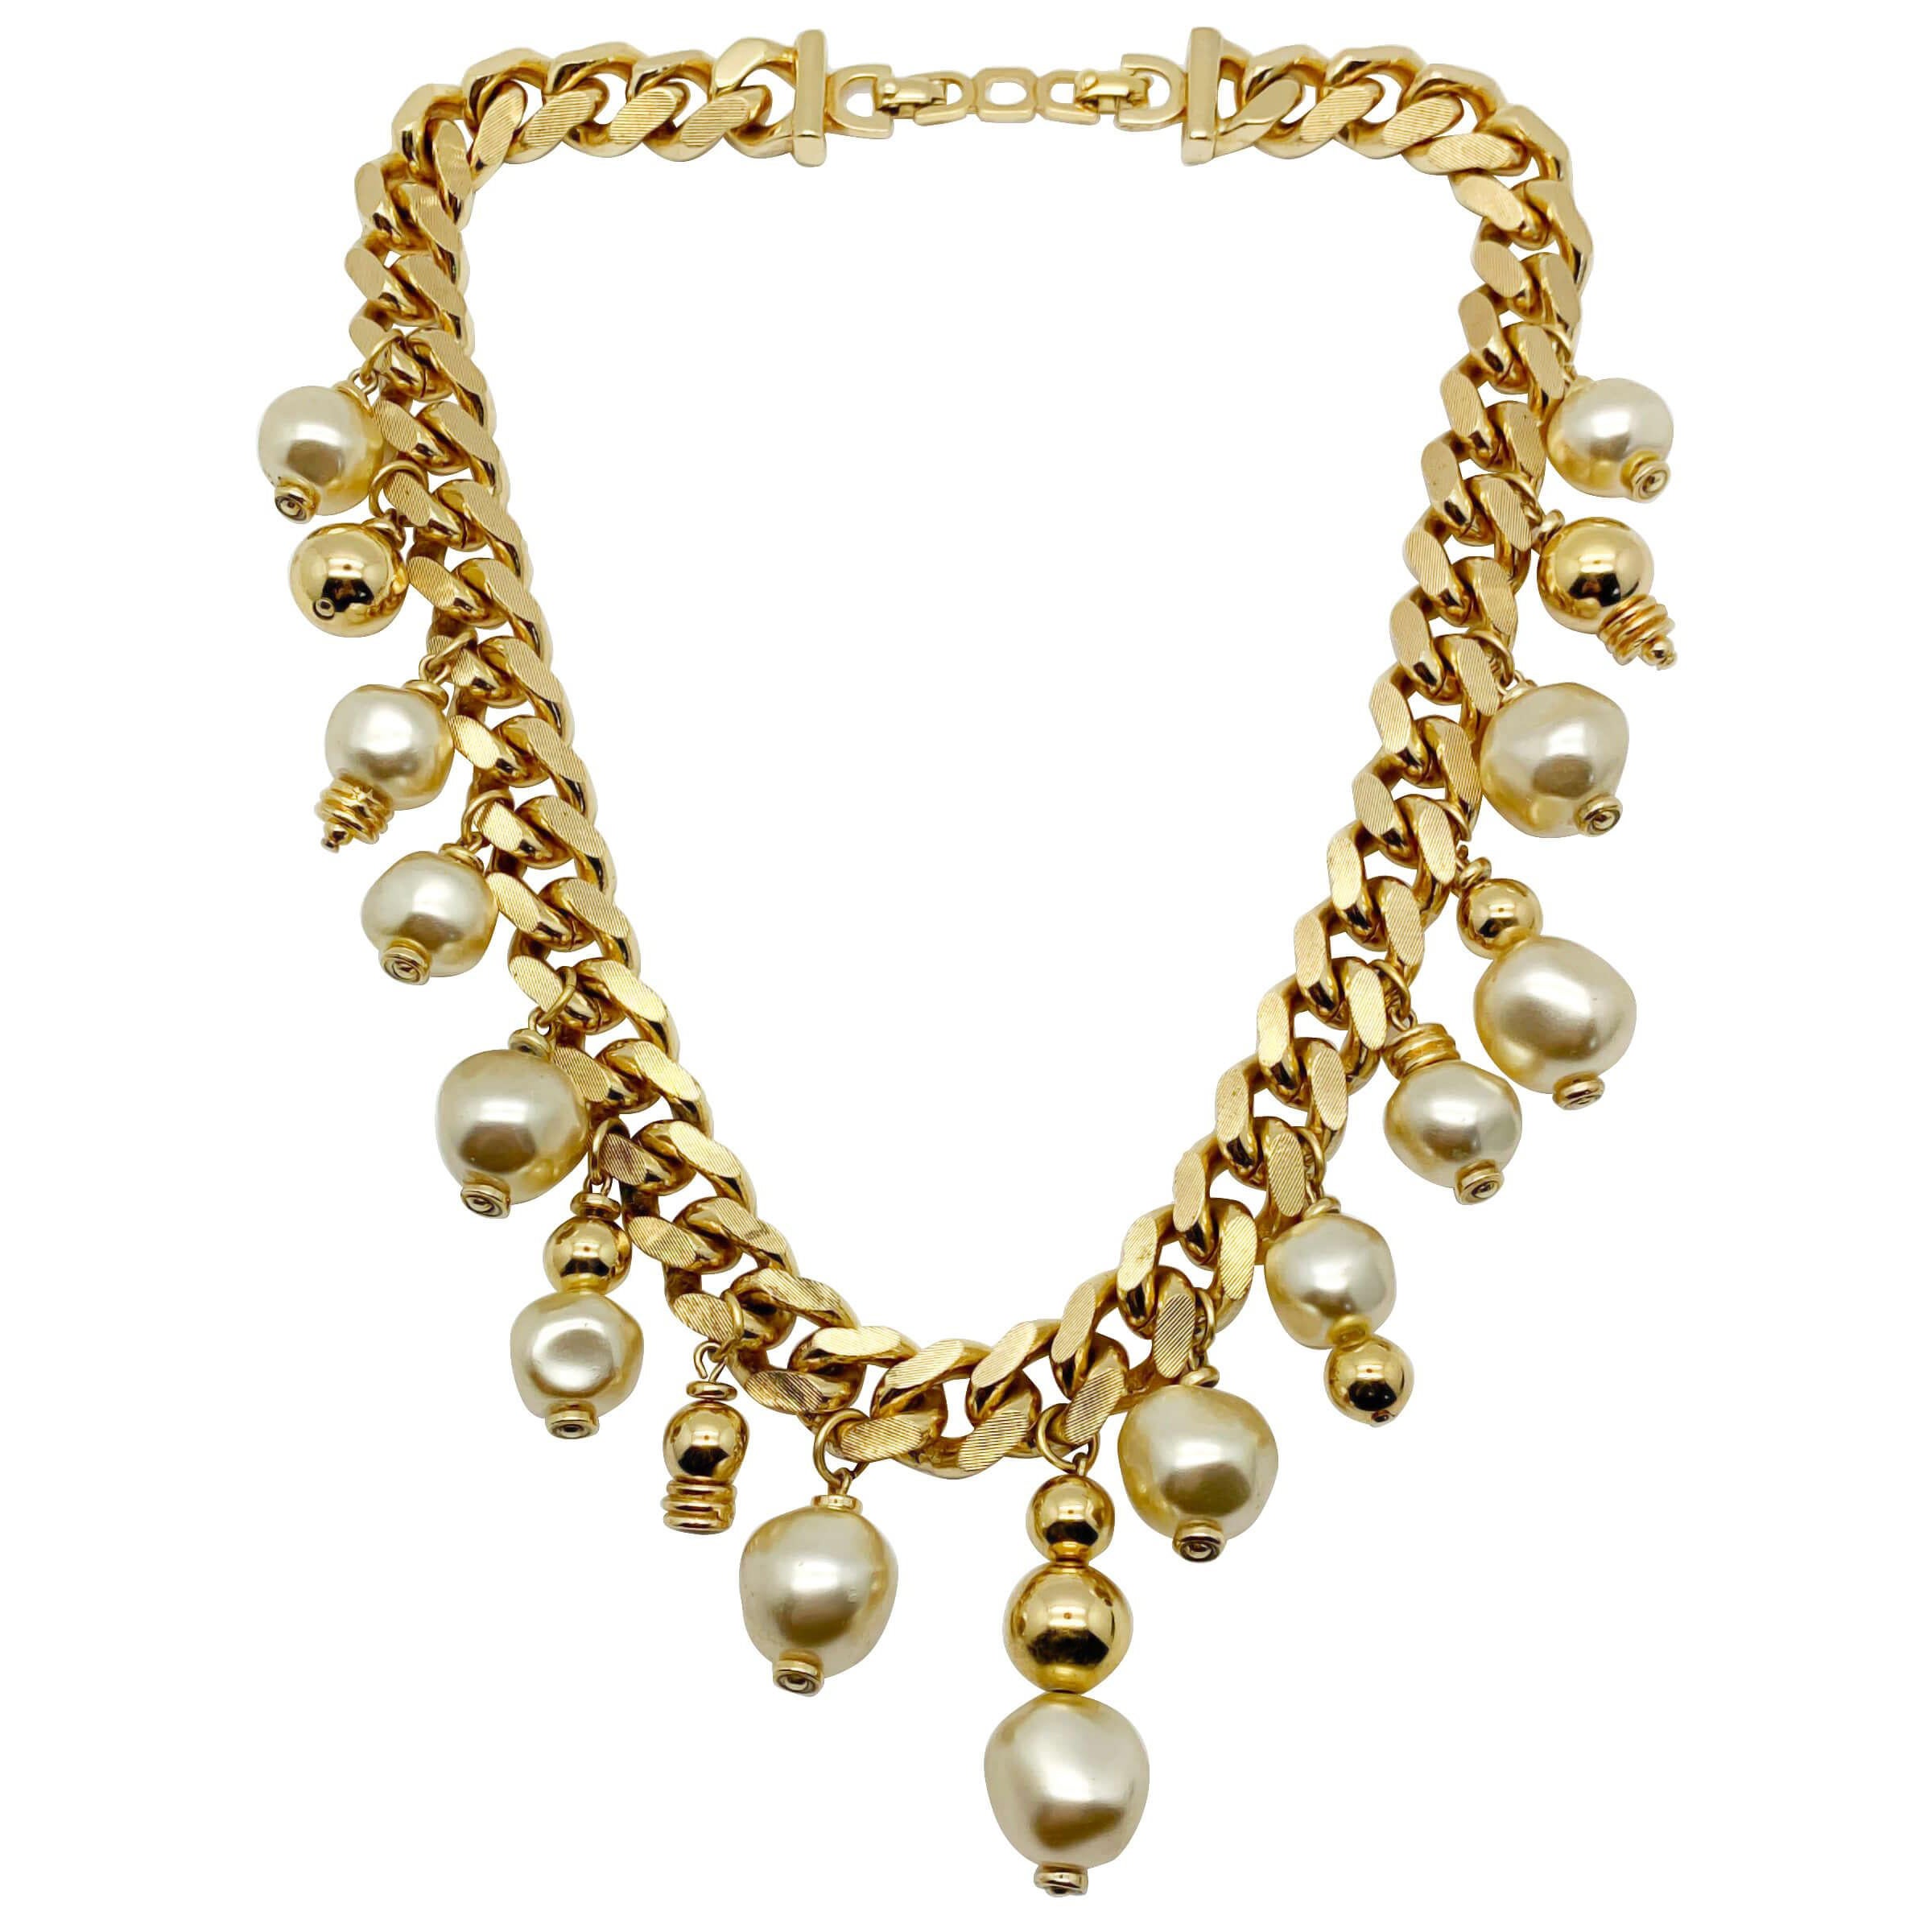 Vintage Christian Dior Asymmetric Pearl Droplet Chain Necklace 1980s